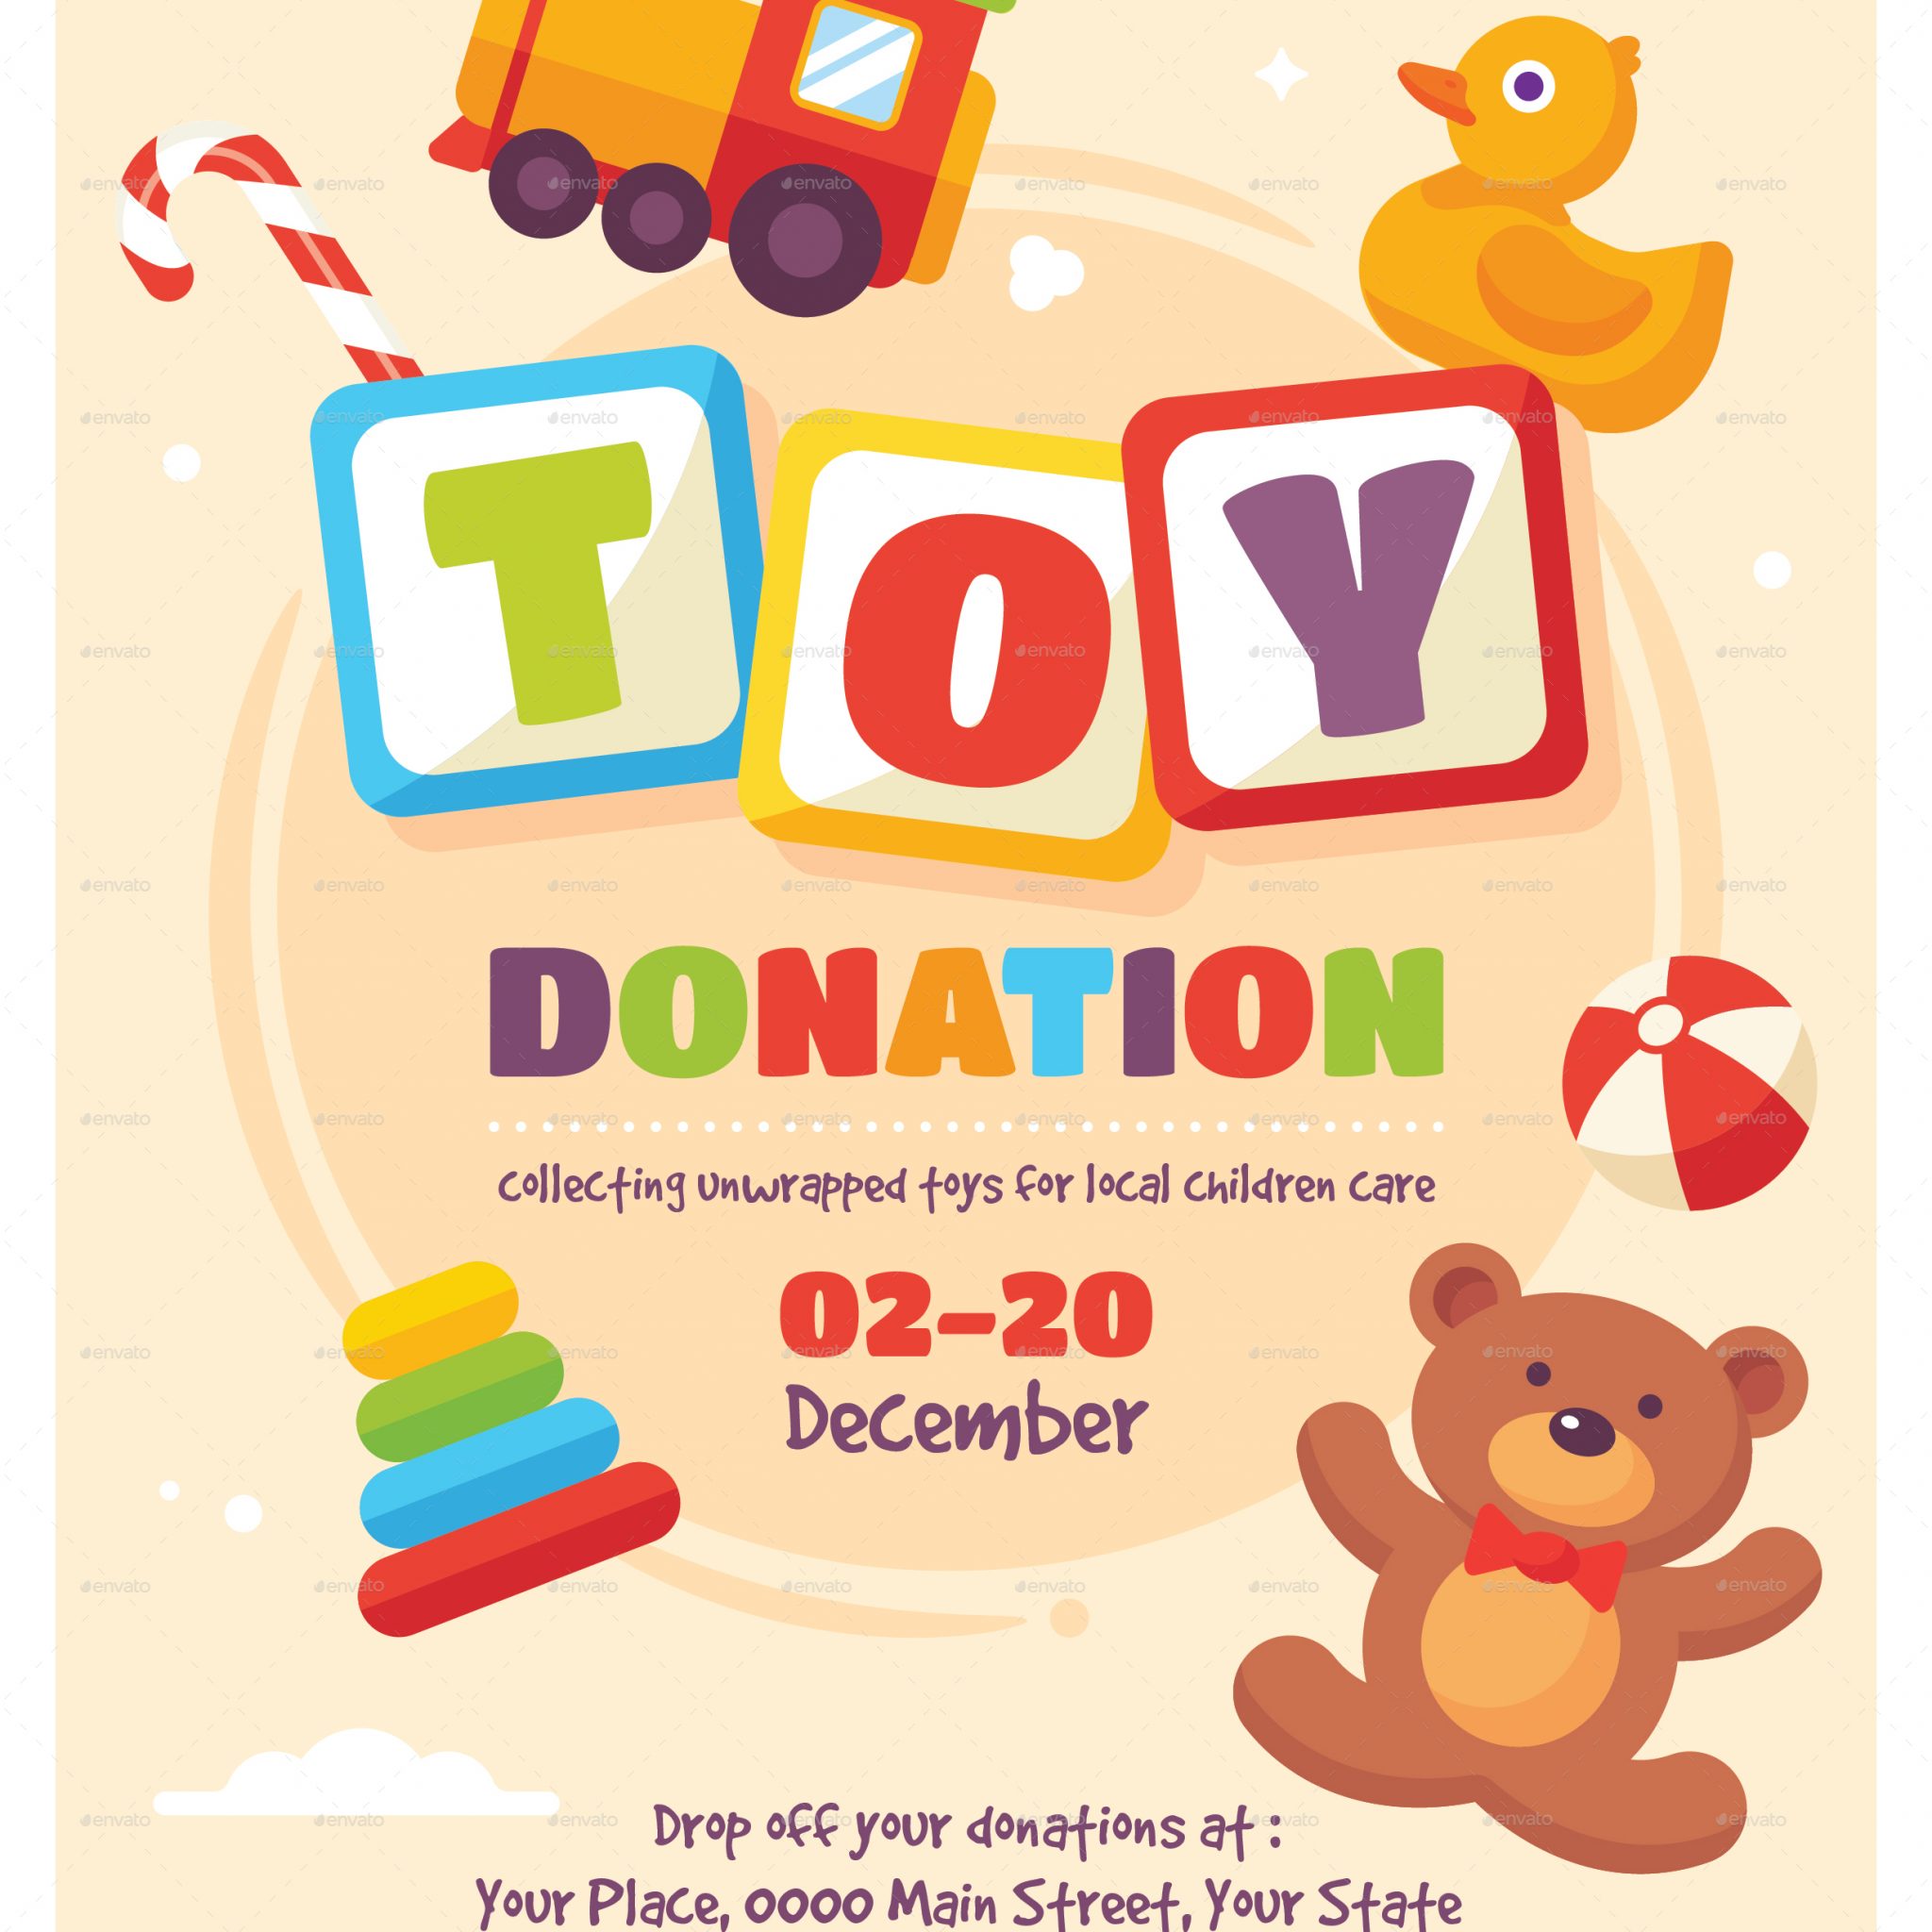 toys for tots flyer template, printable flyer toys for tots flyer template, toy drive flyer template free, toys for tots donation flyer, holiday toy drive flyer template, toy drive flyer template word free, toys for tots ideas